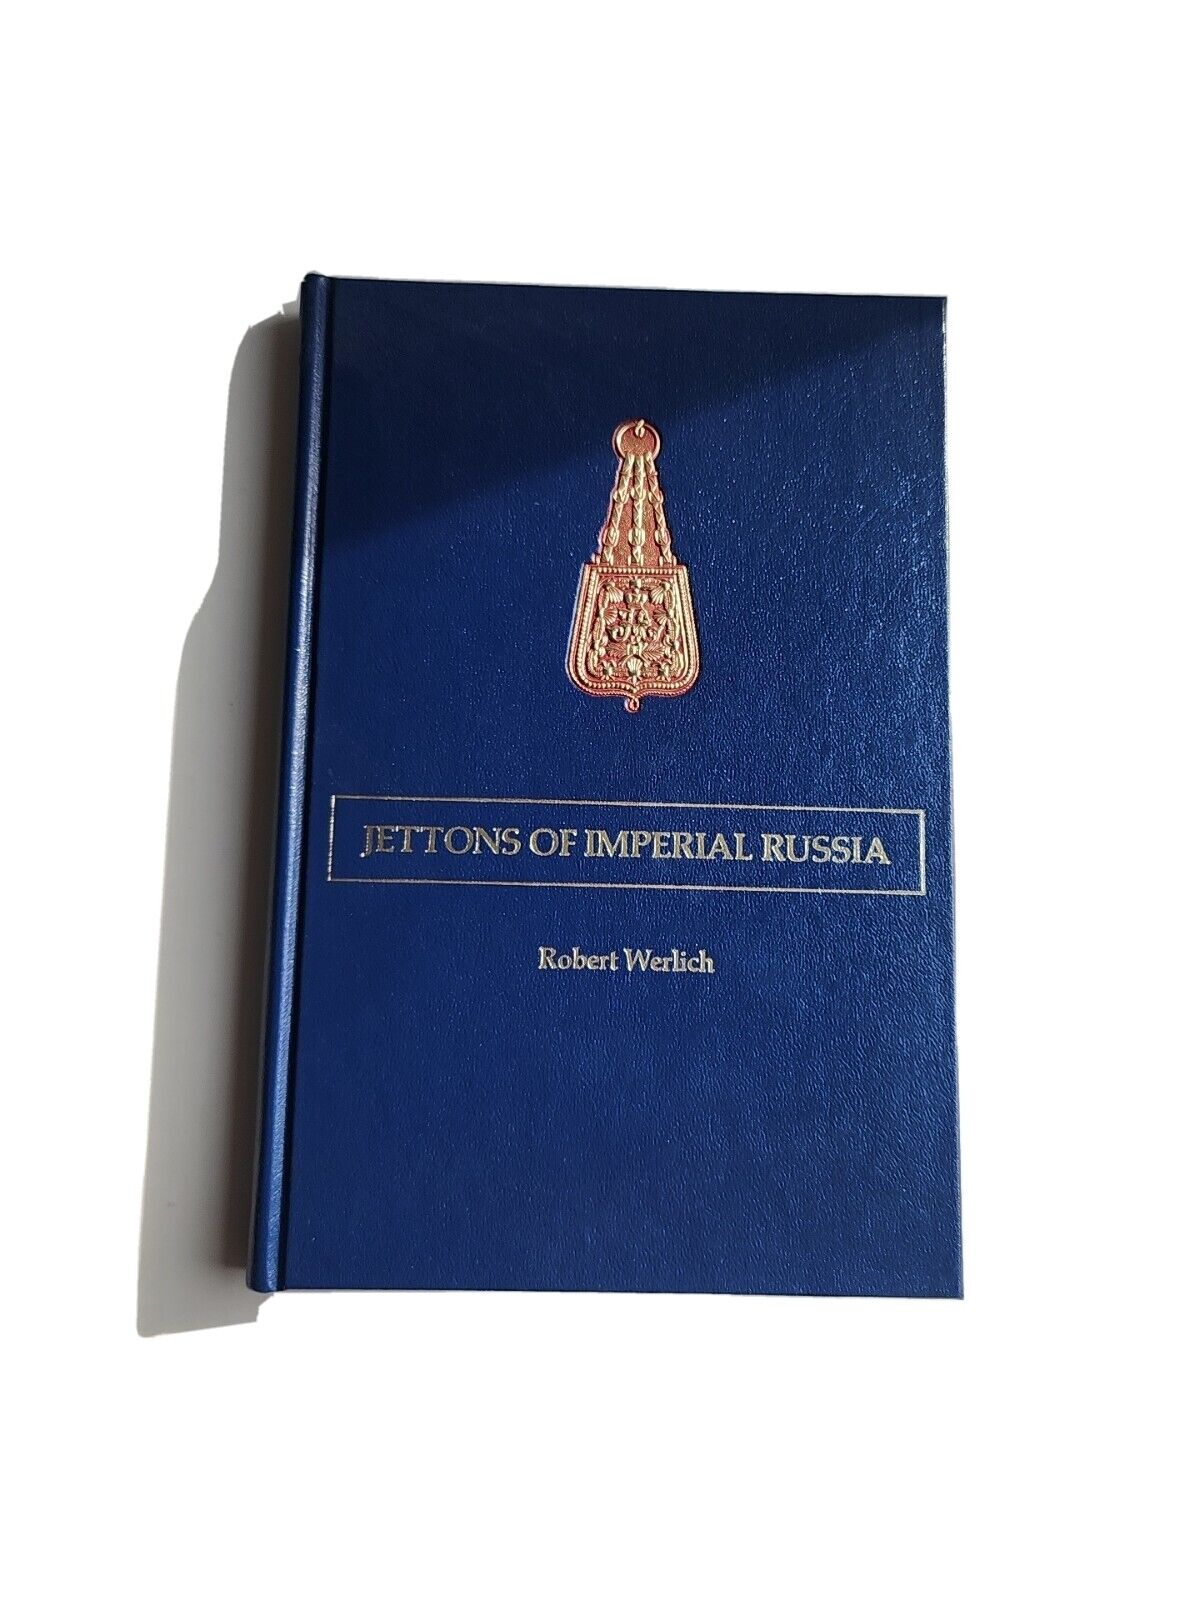 Book JETTONS of  IMPERIAL RUSSIA by ROBERT WERLICH Militaria Collector Reference